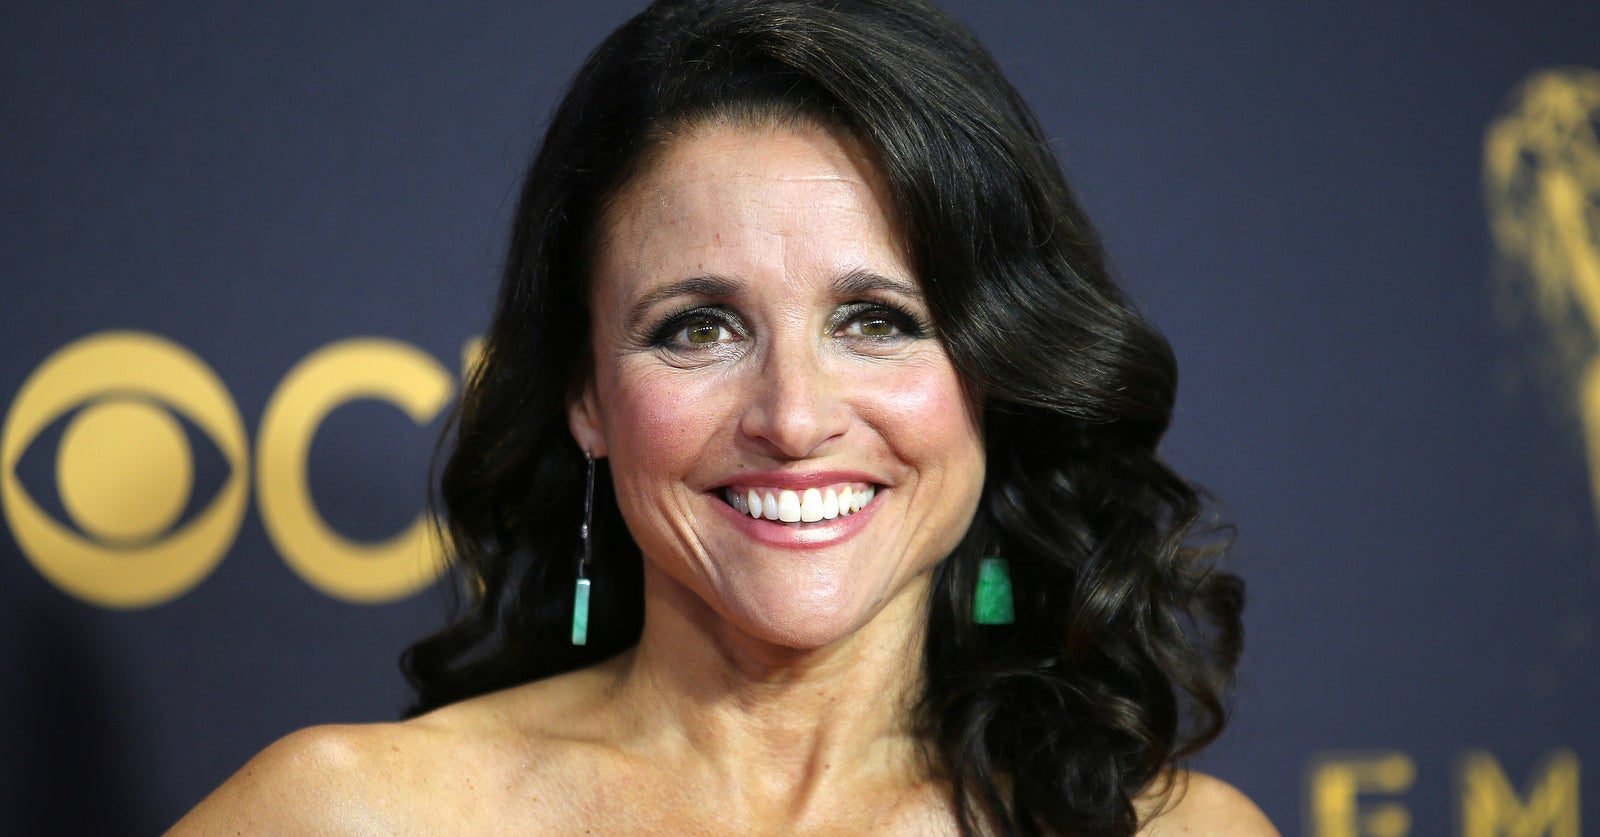 Julia Louis Dreyfus Says She Feels Strong As She Returns To Veep After Cancer Treatment 